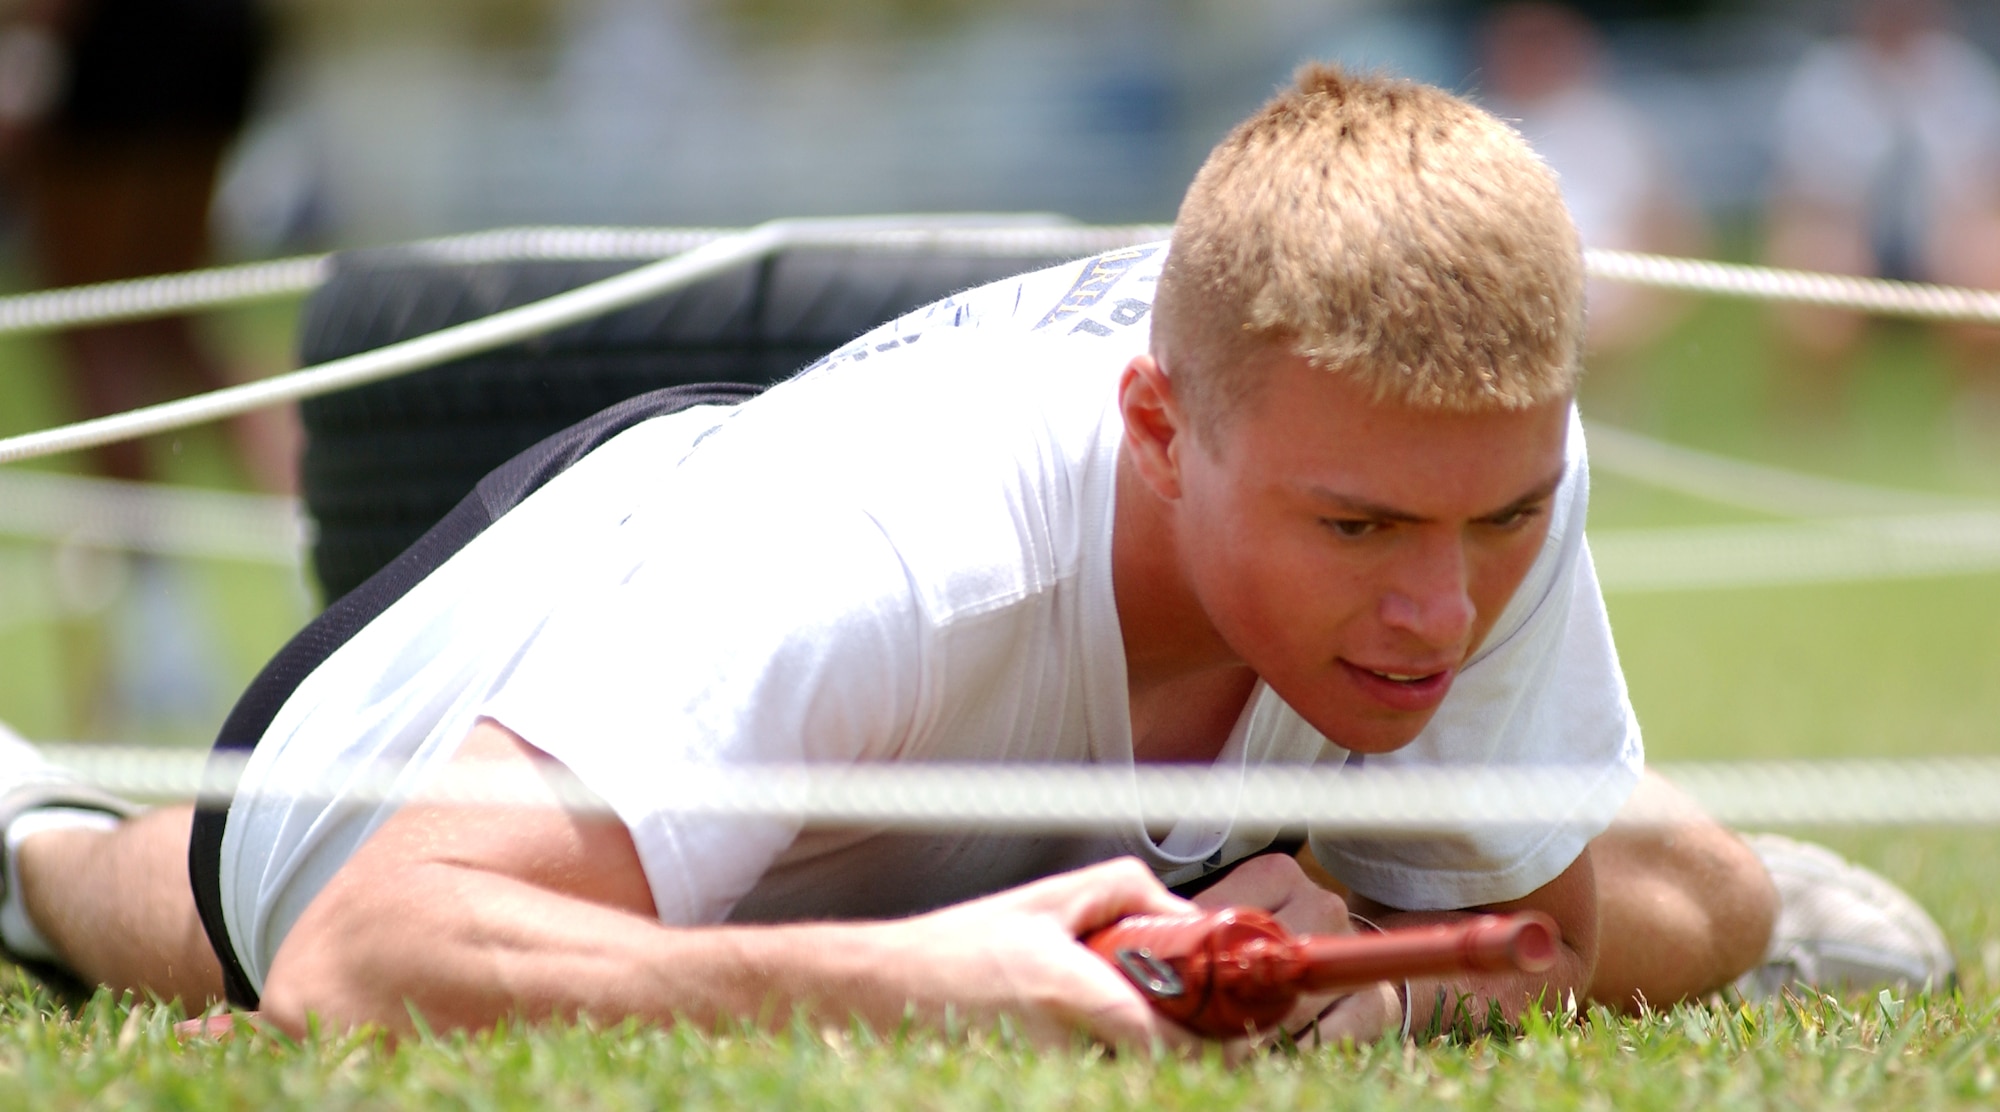 Airman Daniel Shimanski, 18th Aerospace Medicine Squadron, low crawls through an obstacle course with a mock rifle during the 2008 Joint Service Fitness Challenge held at Kadena Air Base July 18. The event pitted 26 teams from various military branches against one another in an attempt to claim fitness supremacy. At the end of the day, Kadena’s own 31st Rescue Squadron walked away with the first and second place trophies and the opportunity to defend their title next year. (U.S. Air Force photo/Senior Airman Nestor Cruz) 